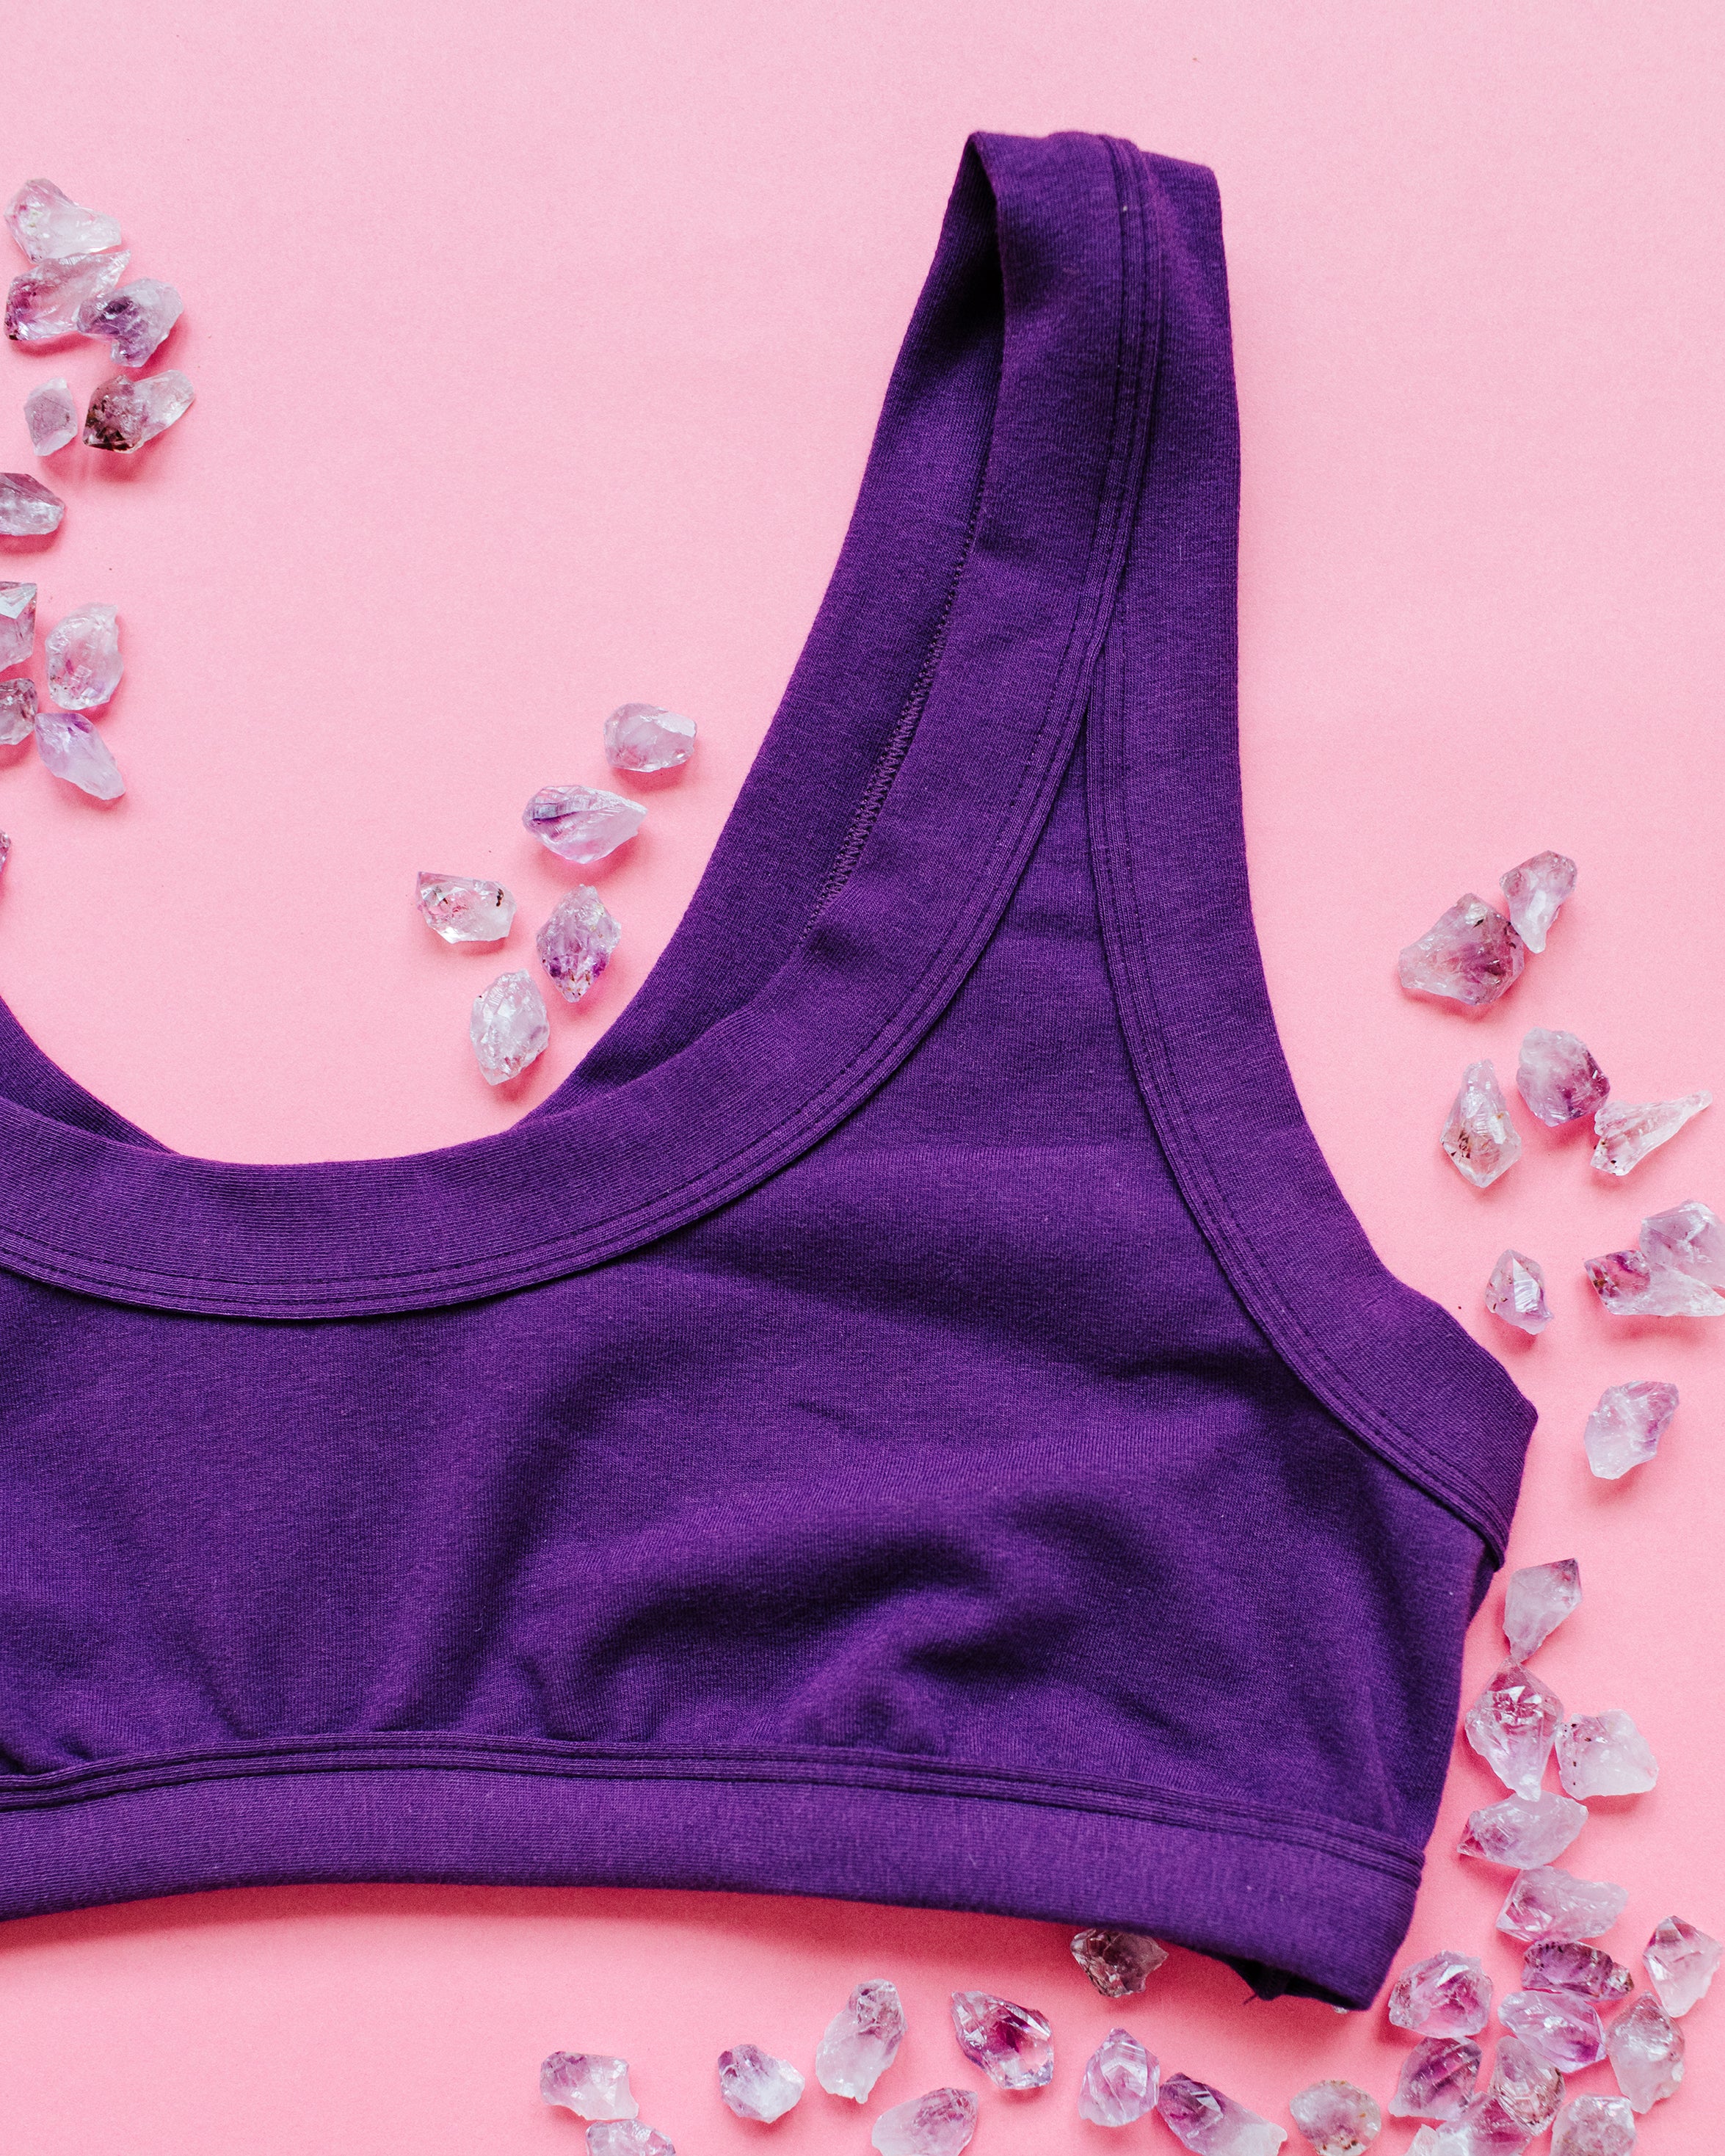 Flat lay of purple Deep Amethyst Bralette on a pink background with small amethyst stones surrounding it.